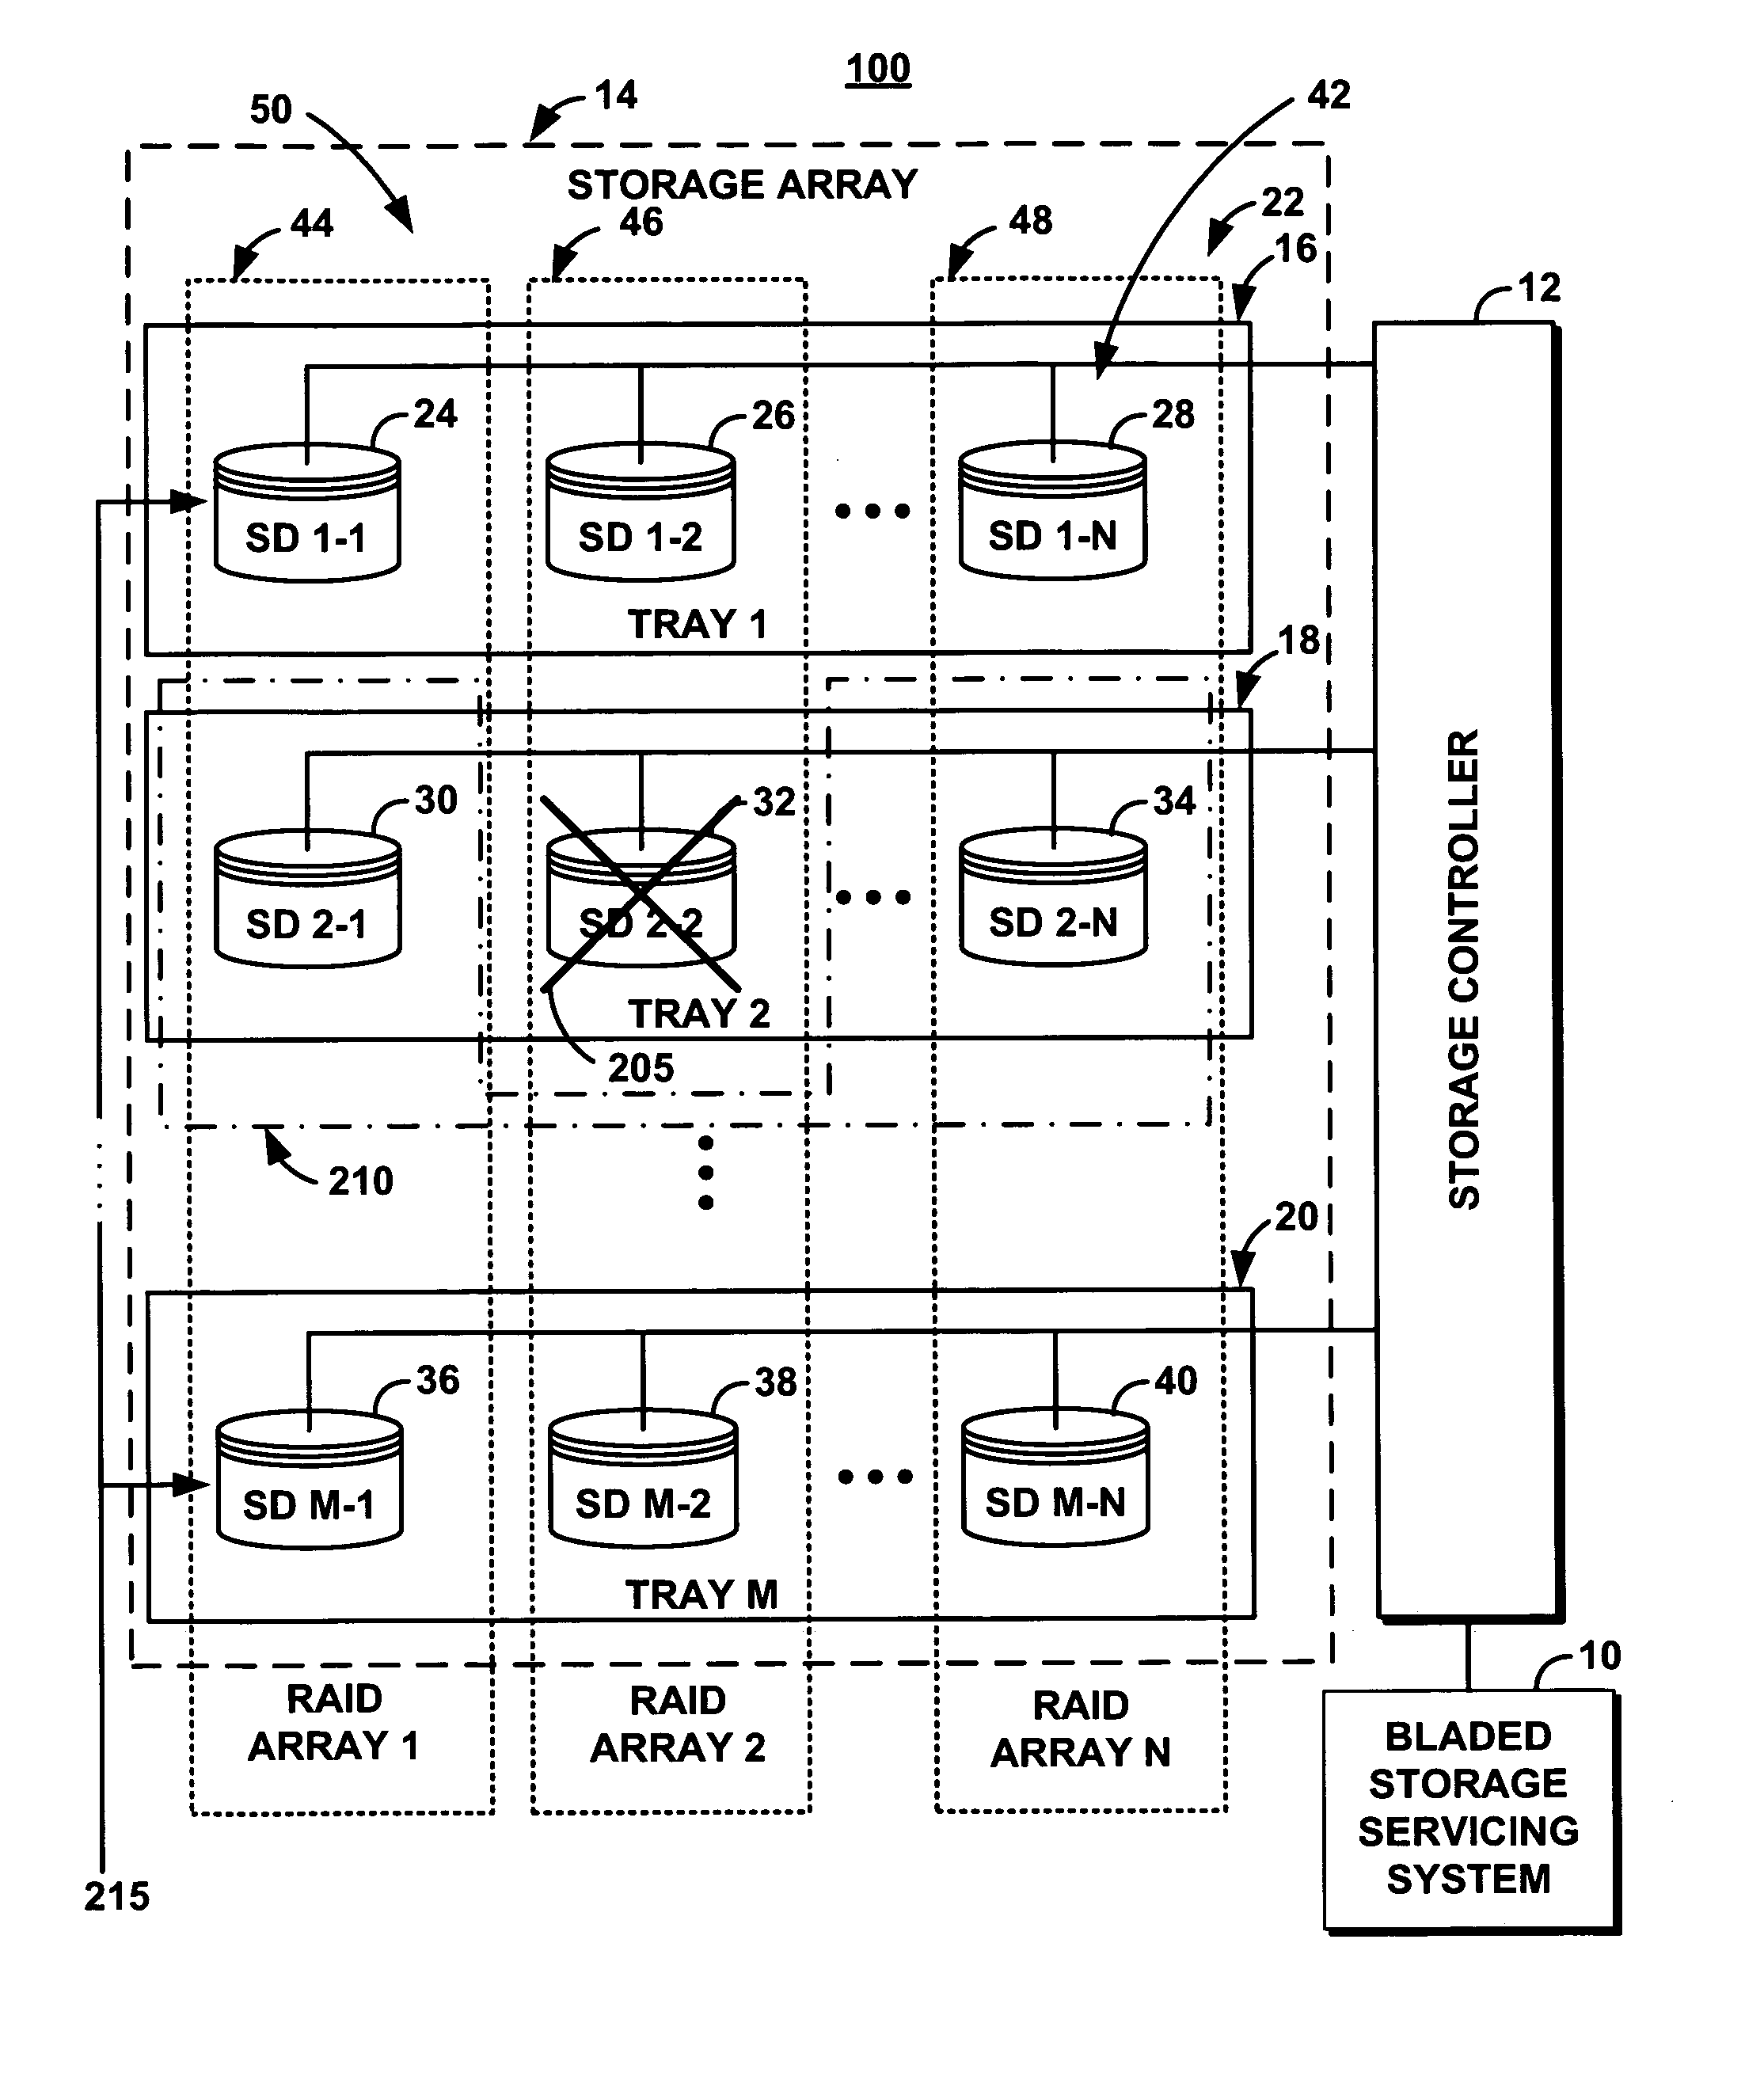 Method for servicing storage devices in a bladed storage subsystem